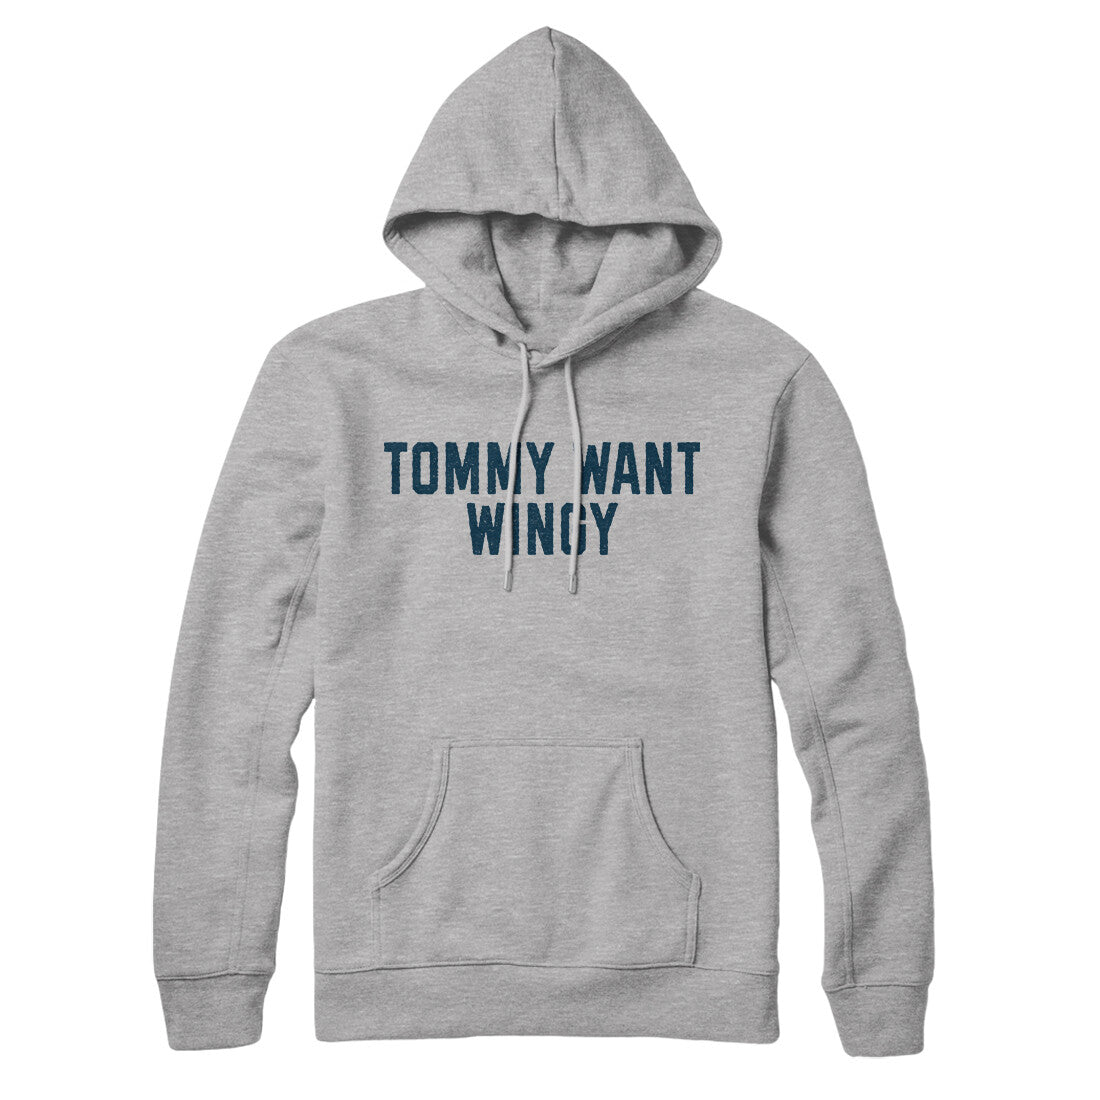 Tommy Want Wingy in Heather Grey Color